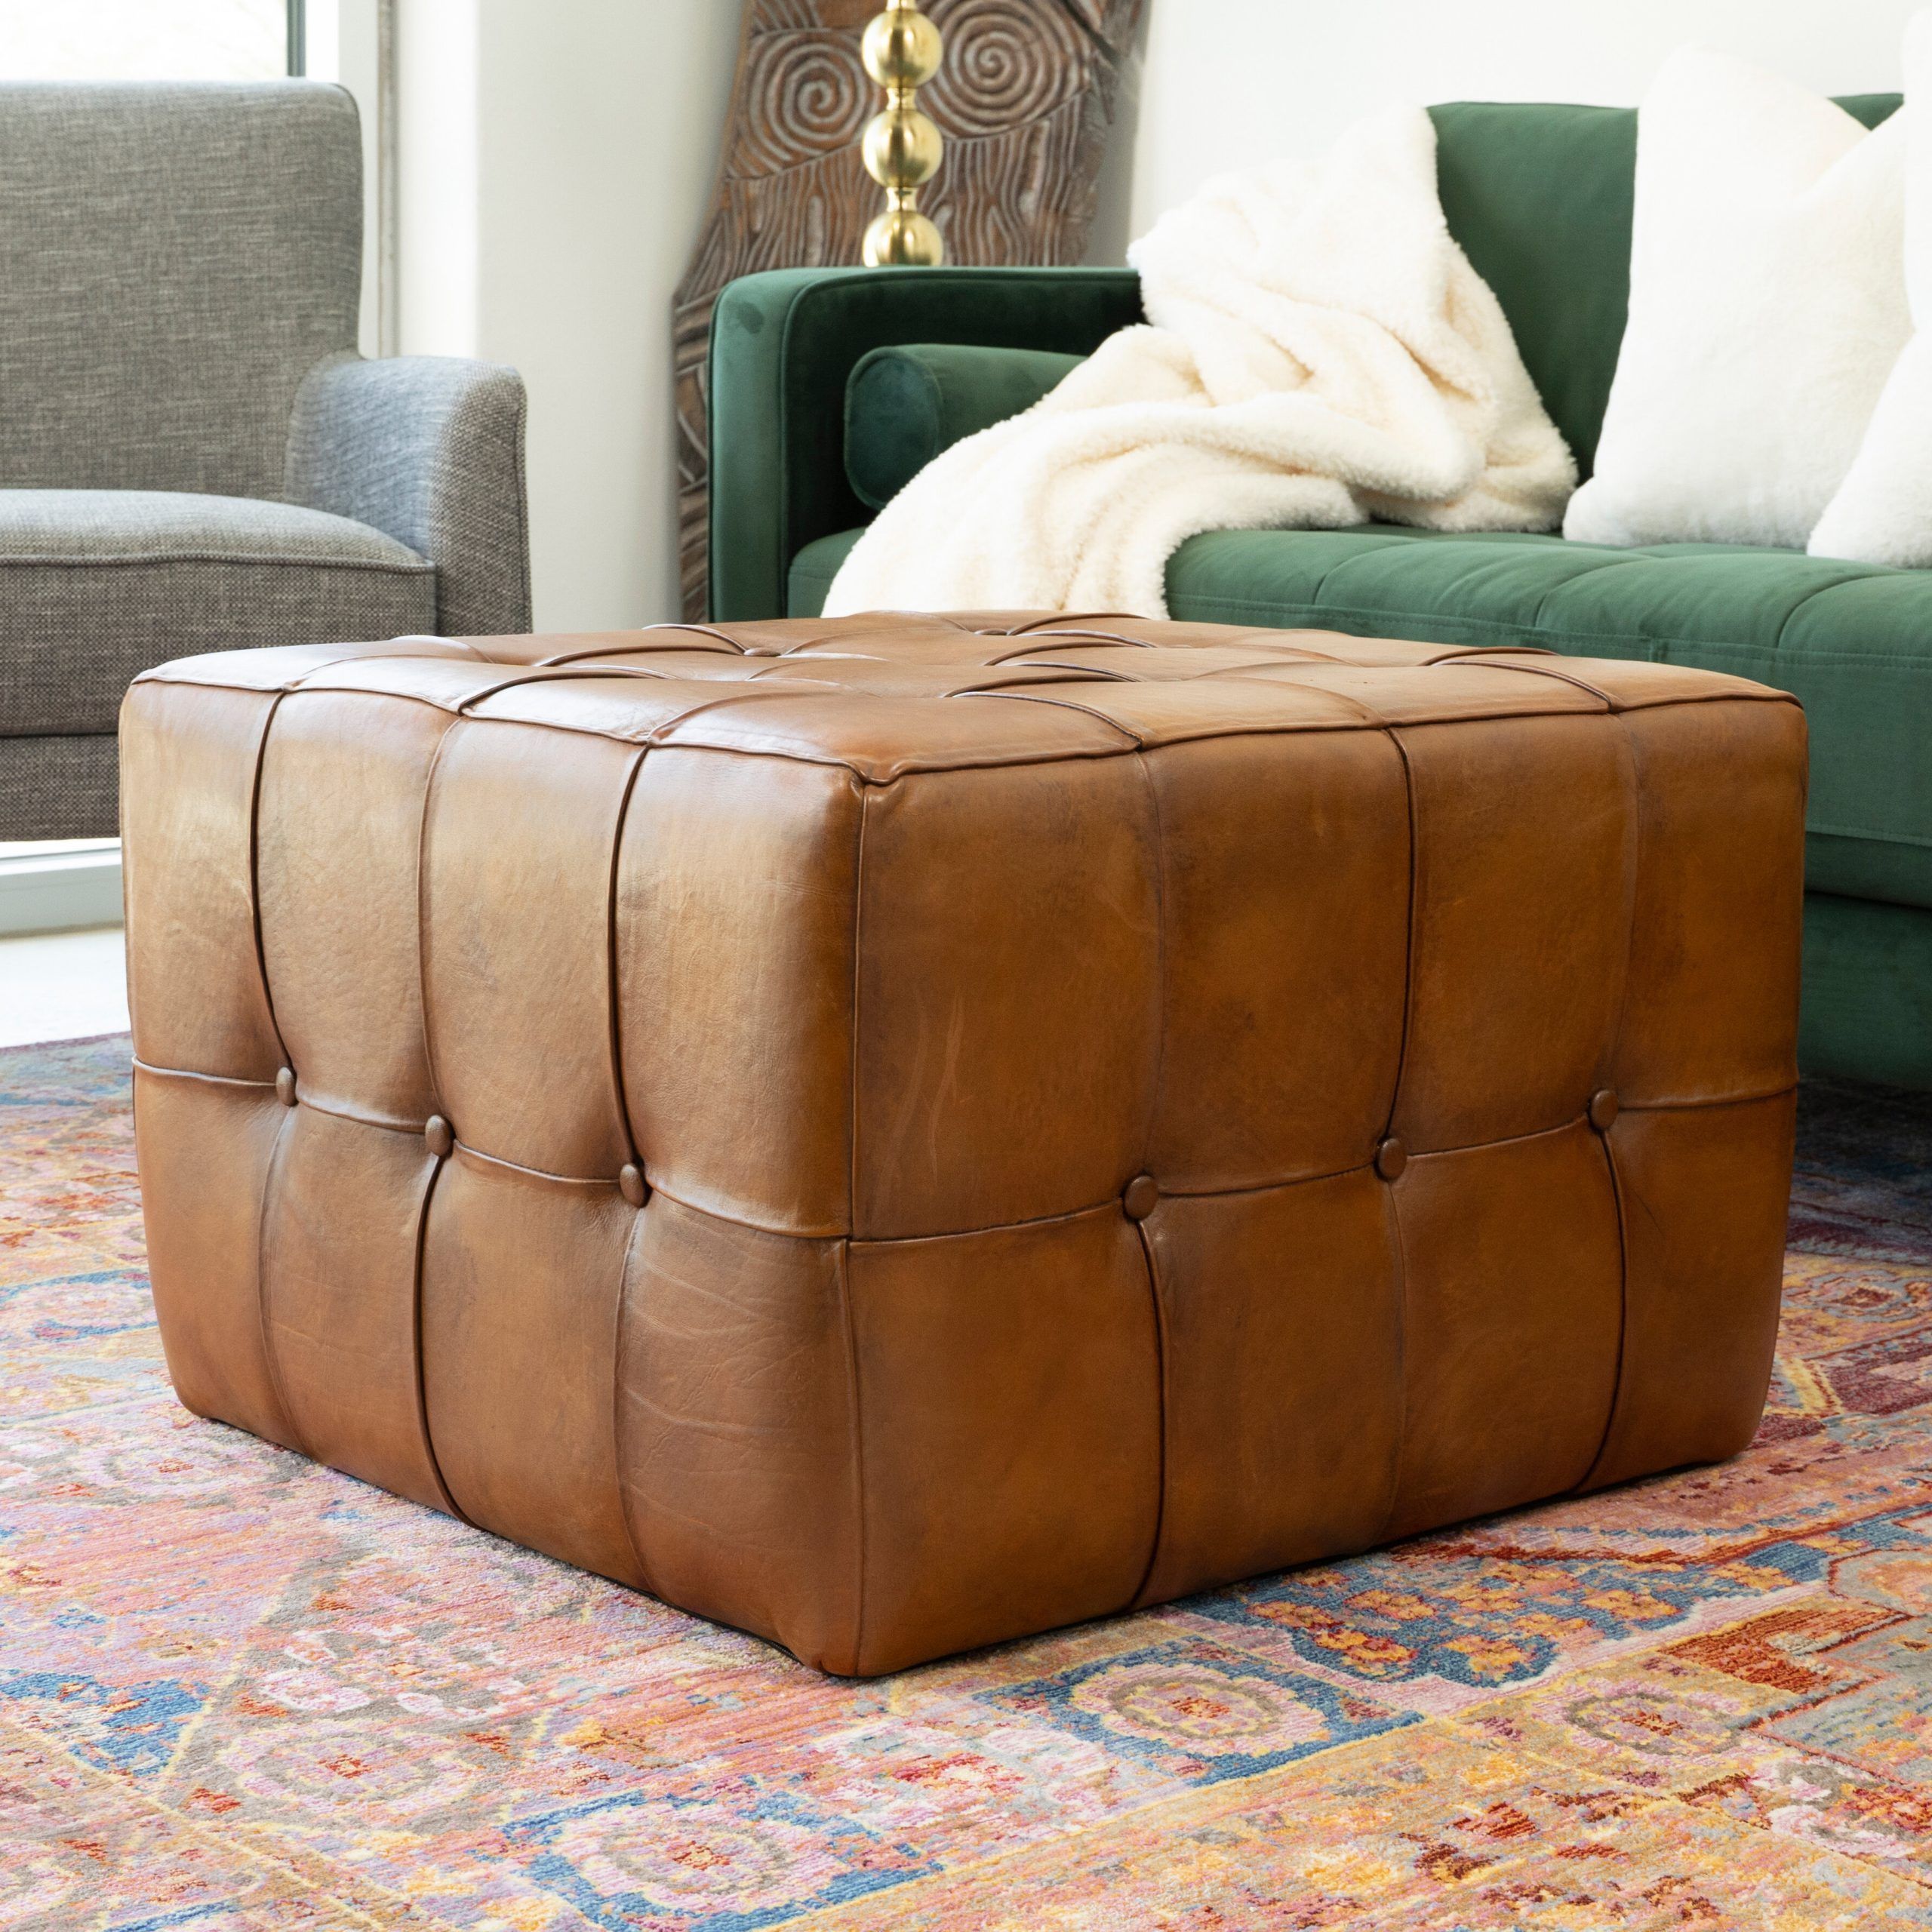 Union Rustic Alouise Leather Ottoman & Reviews | Wayfair With Regard To Brown Leather Ottomans (View 2 of 15)